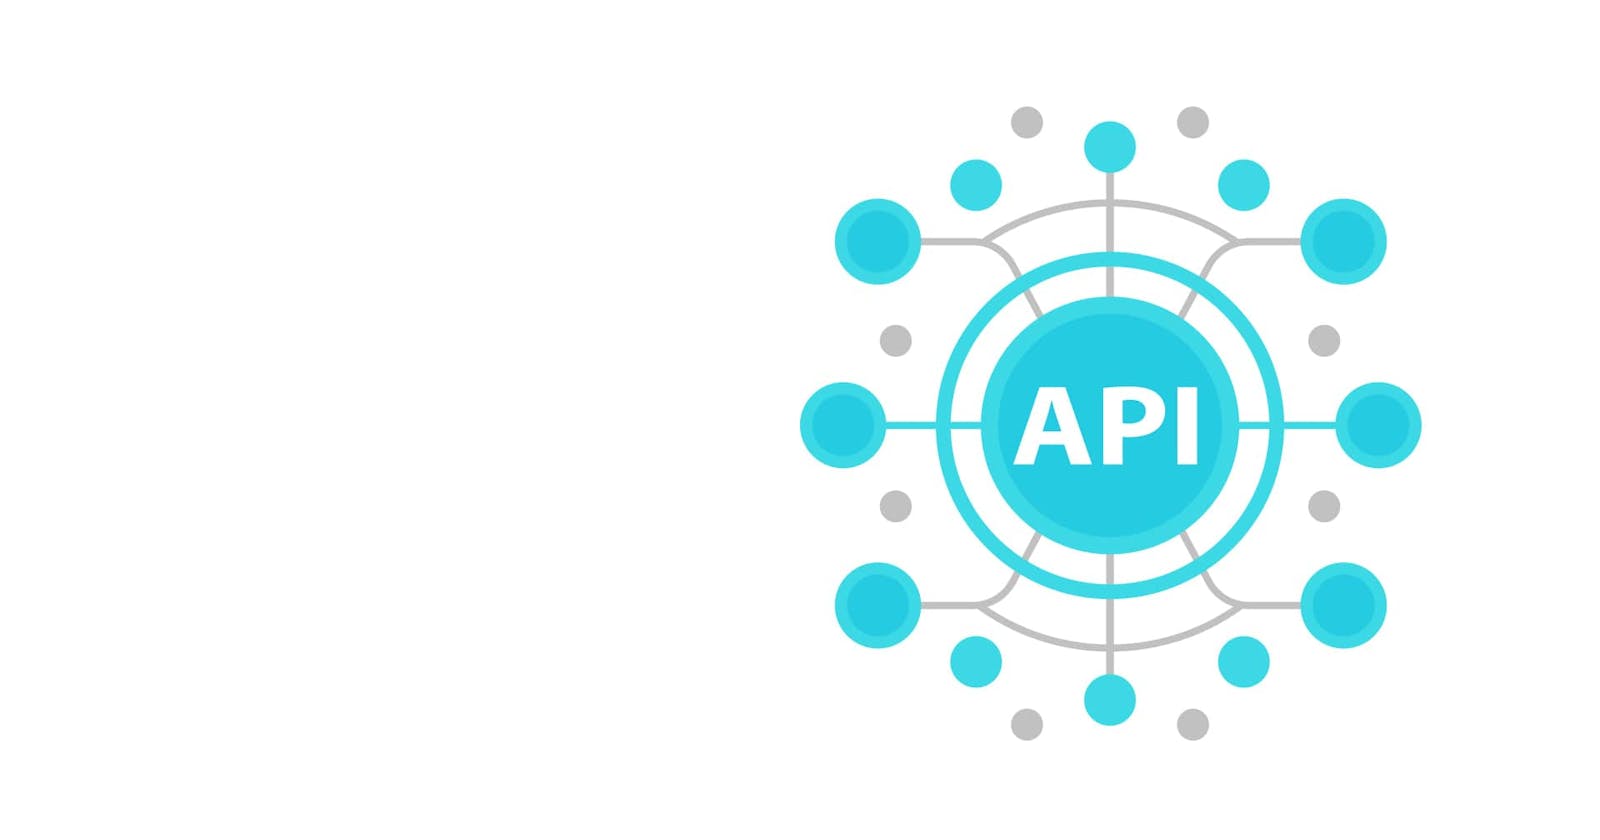 Getting started  with API Integration